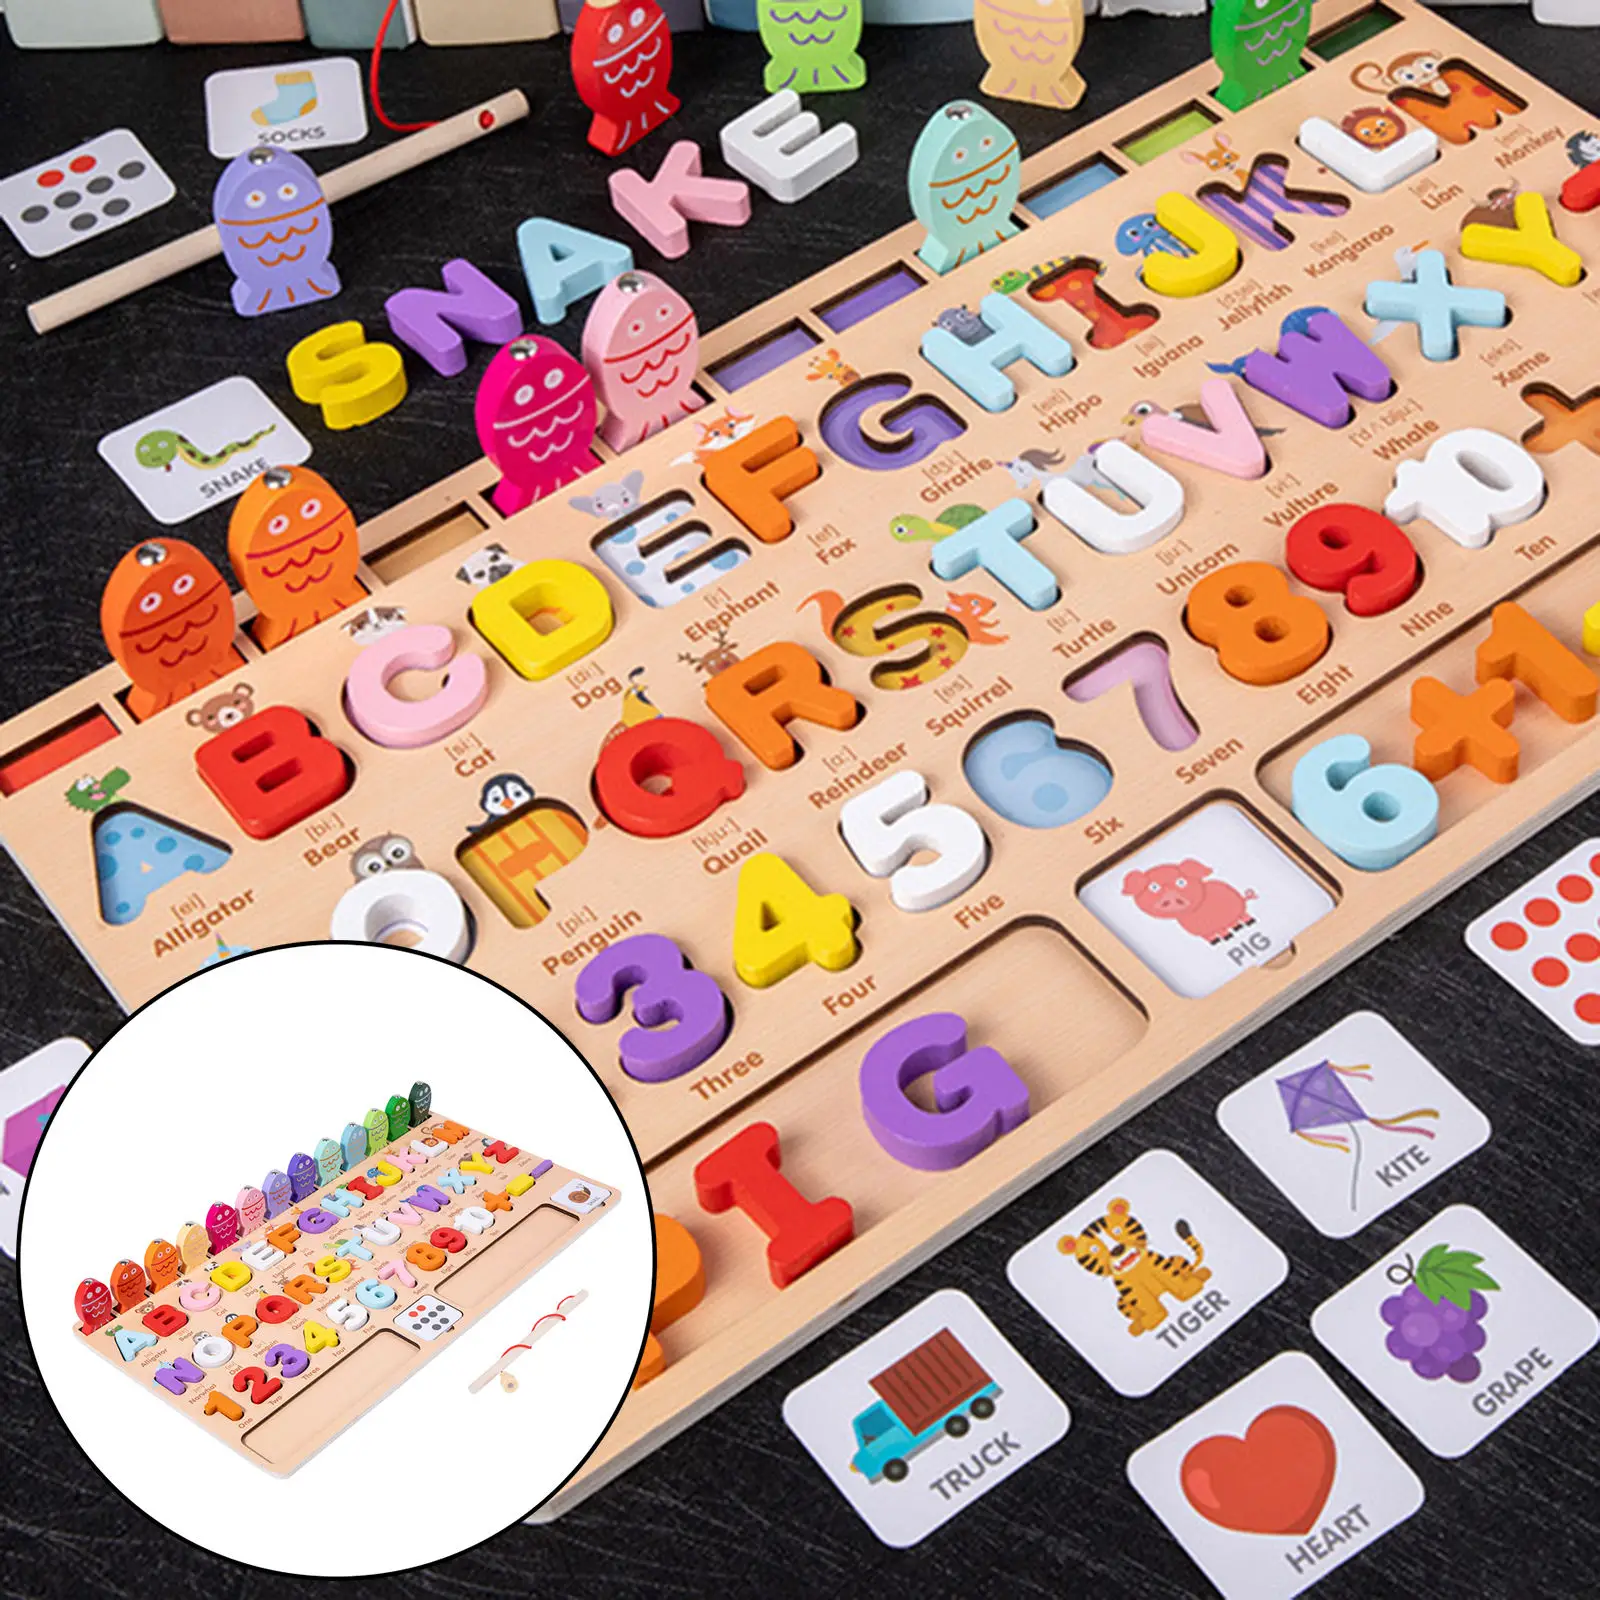 Wooden ABC Letter Number Fishing Game Montessori Toy for Toddlers Preschools